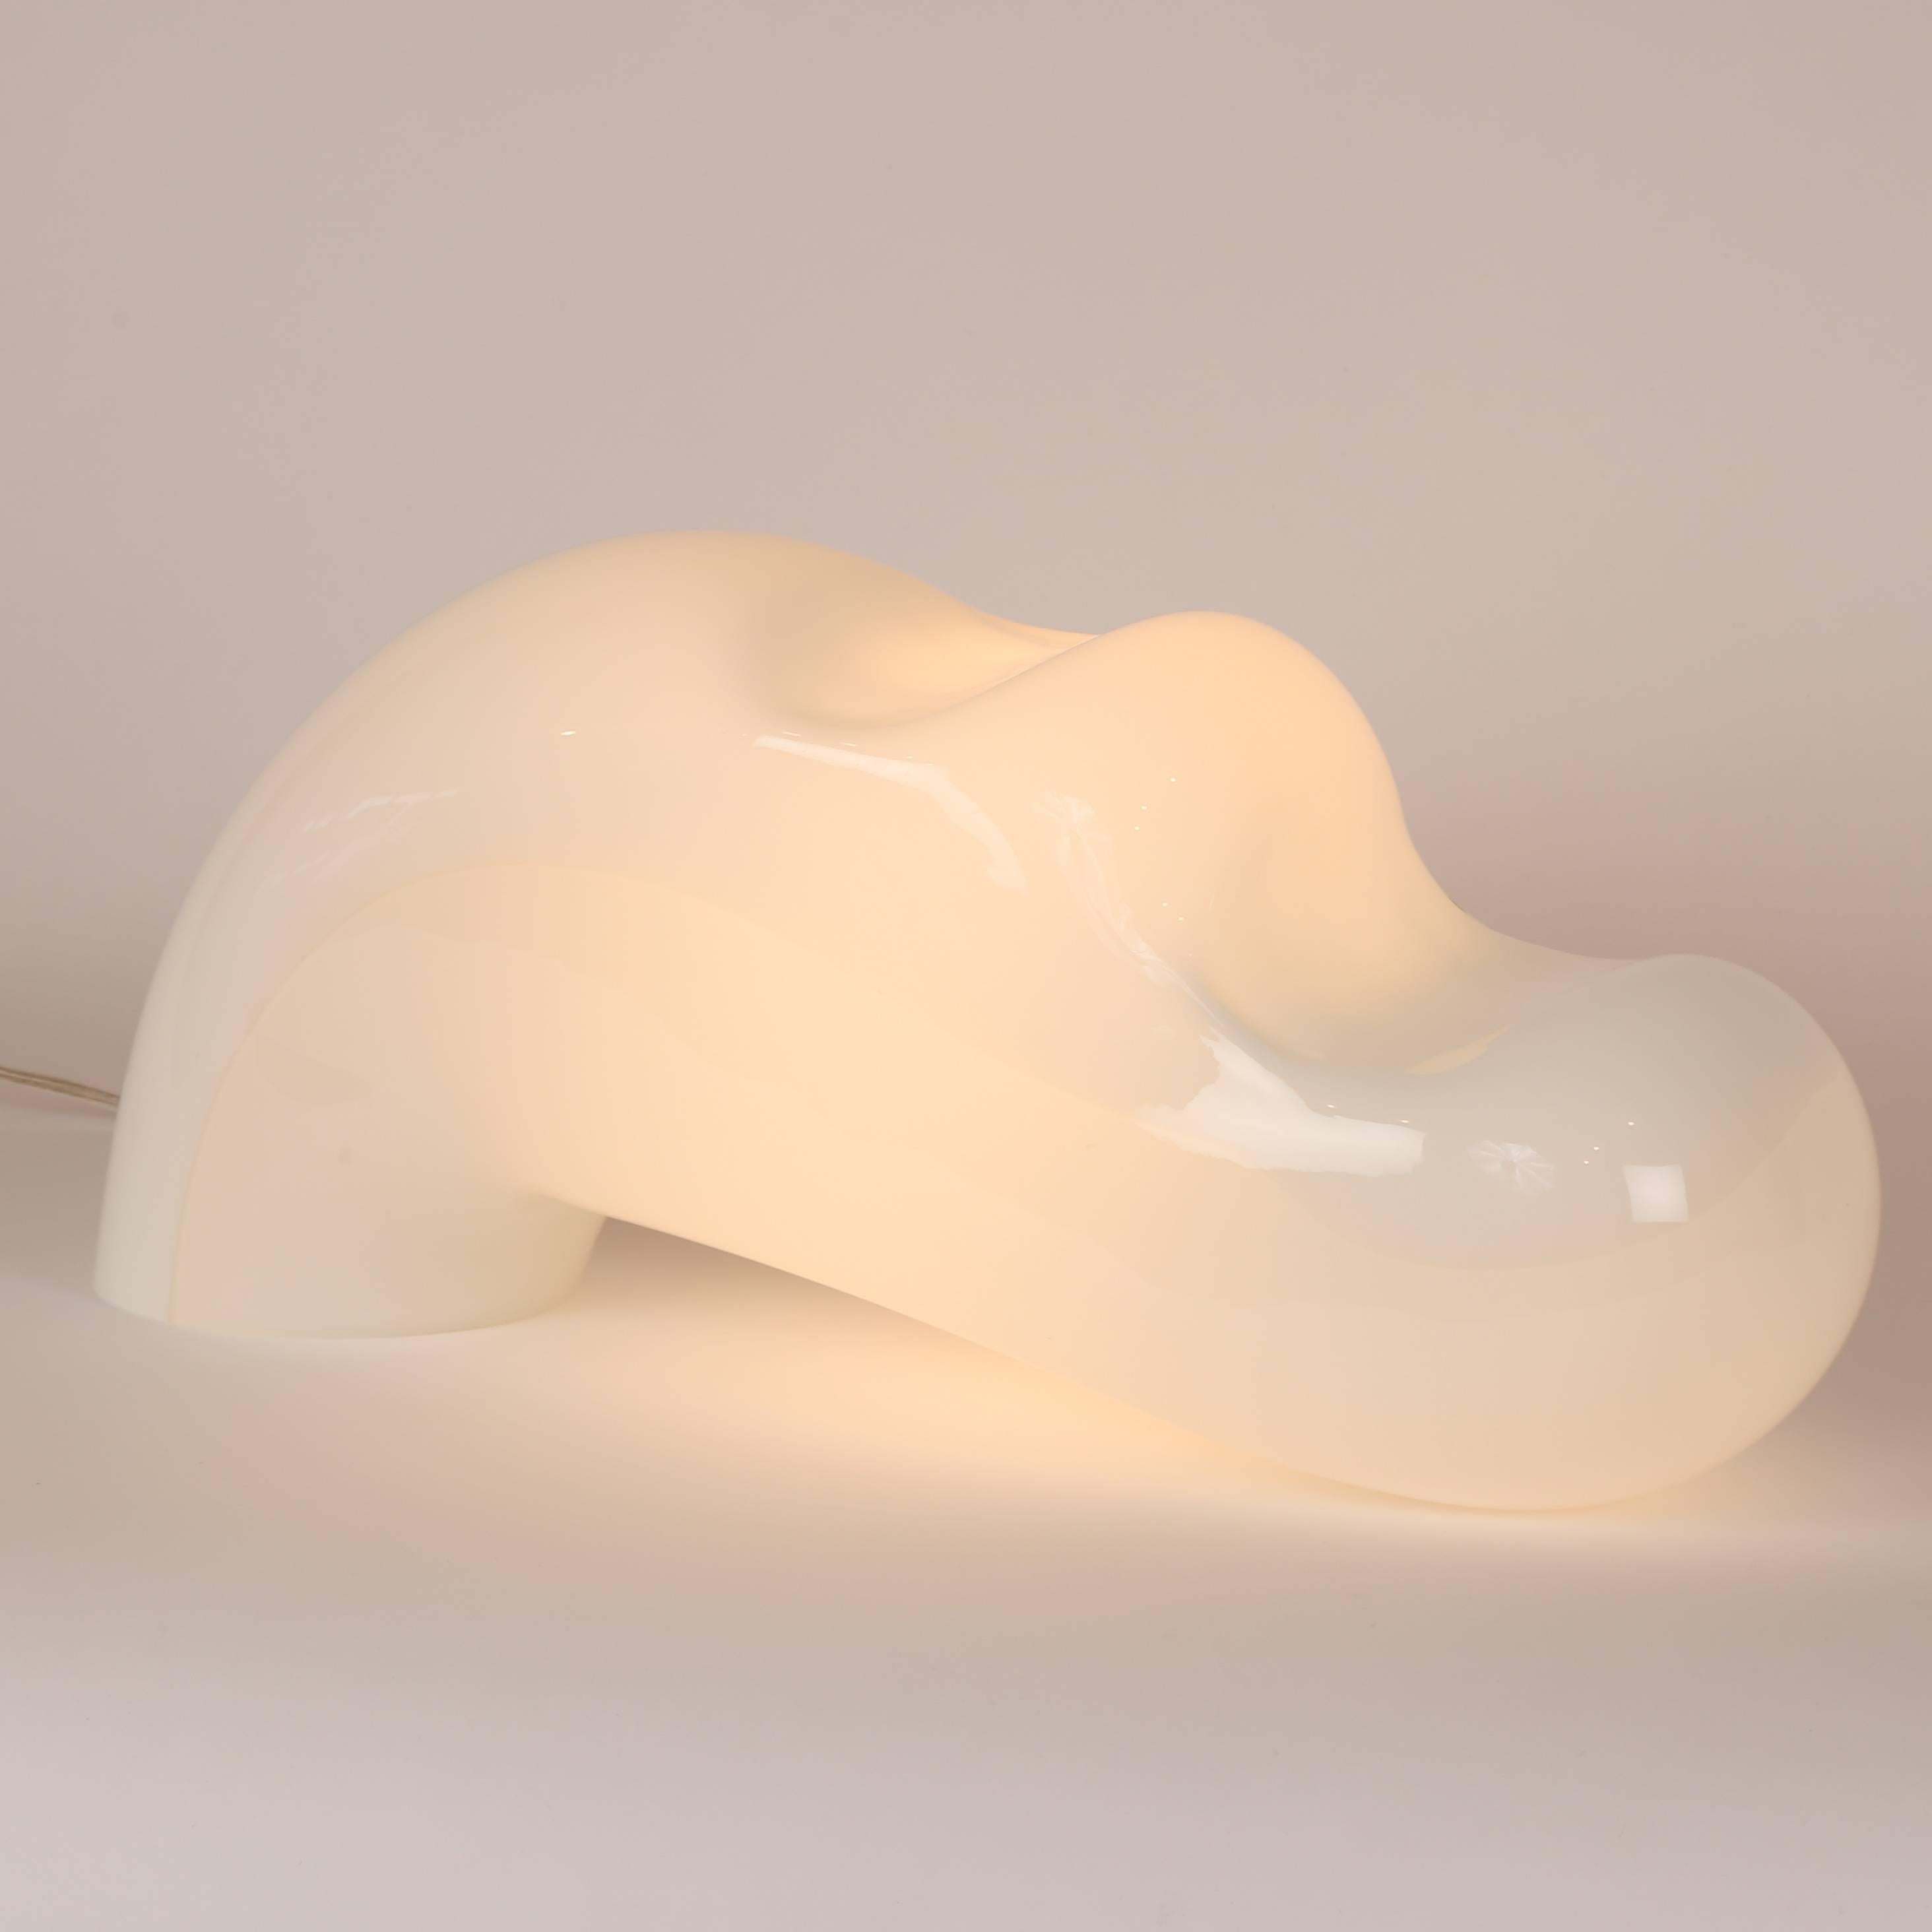 This curvaceous Murano glass accent lamp brings to mind a 1970s platform shoe, an inch worm, or perhaps a snail. You decide! Illuminated by a single standard-base bulb; switch on the cord. 



